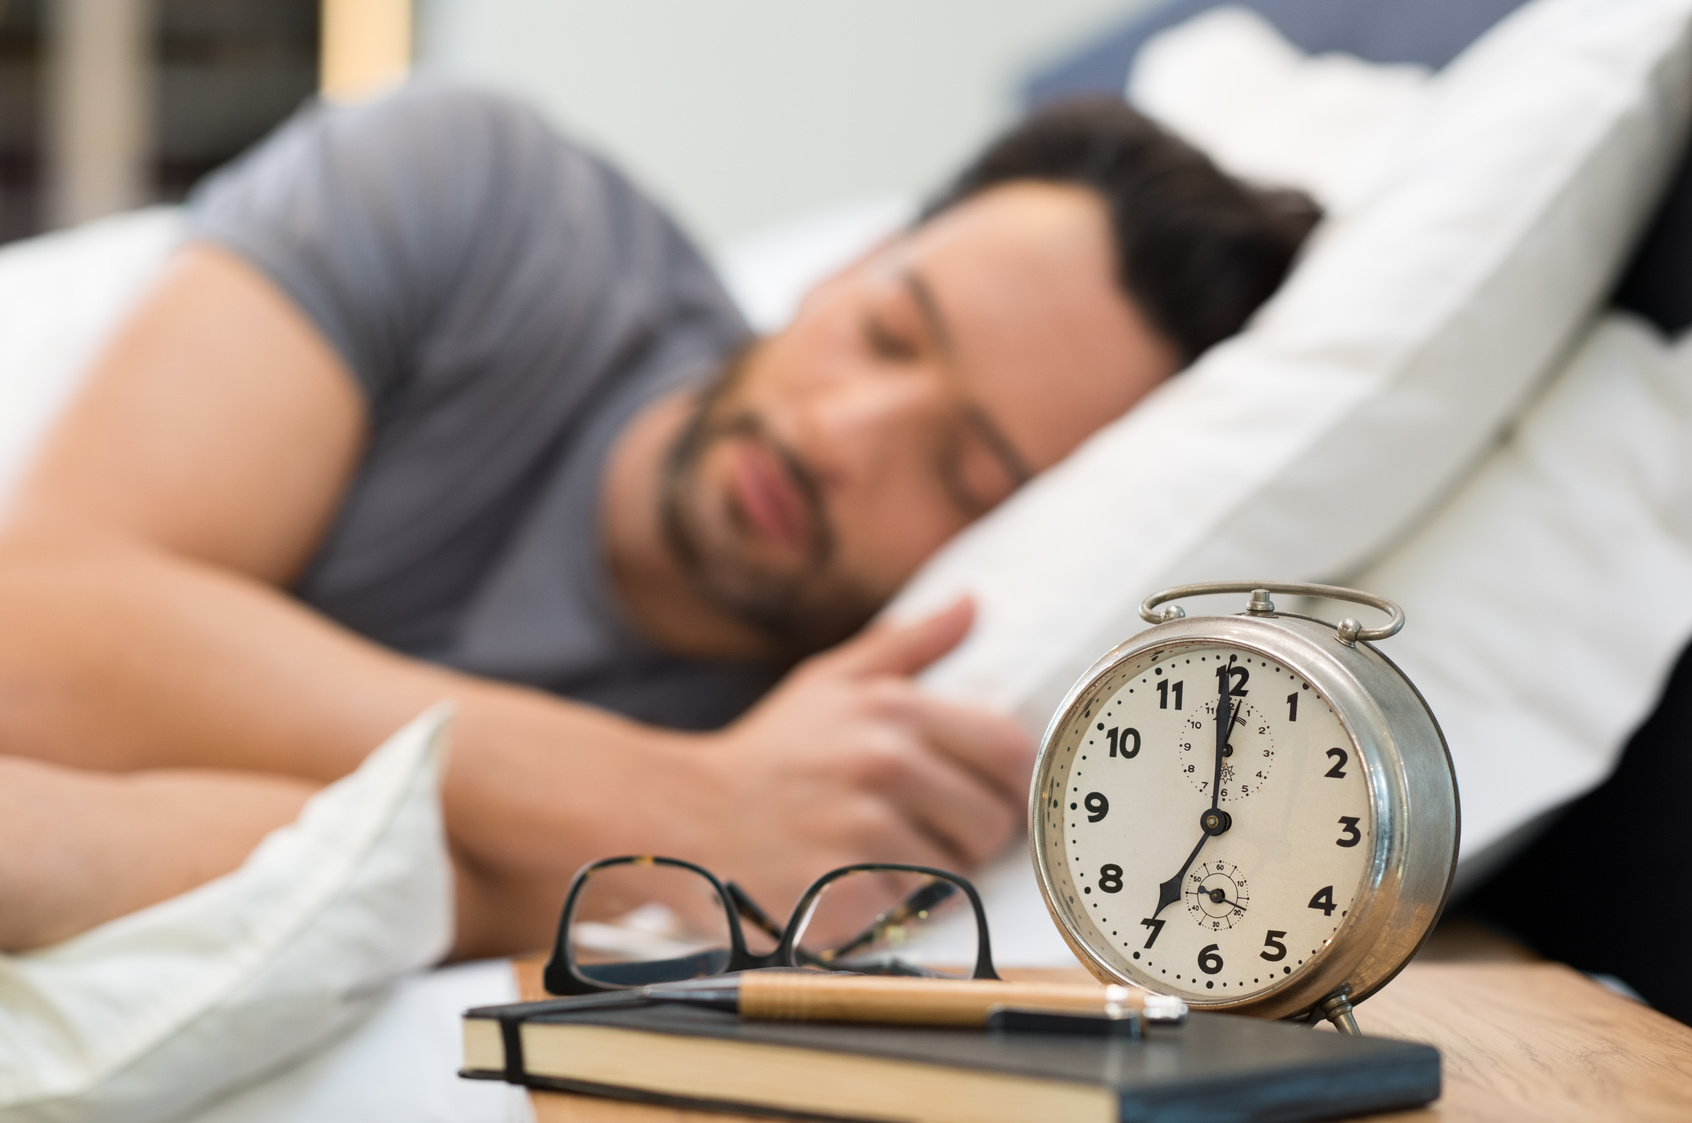 Young man sleeping in his bedroom. Man sleeping with an alarm clock in foreground. A calm man in his bed before waking up in his room. Close up of alarm clock on bedside table.